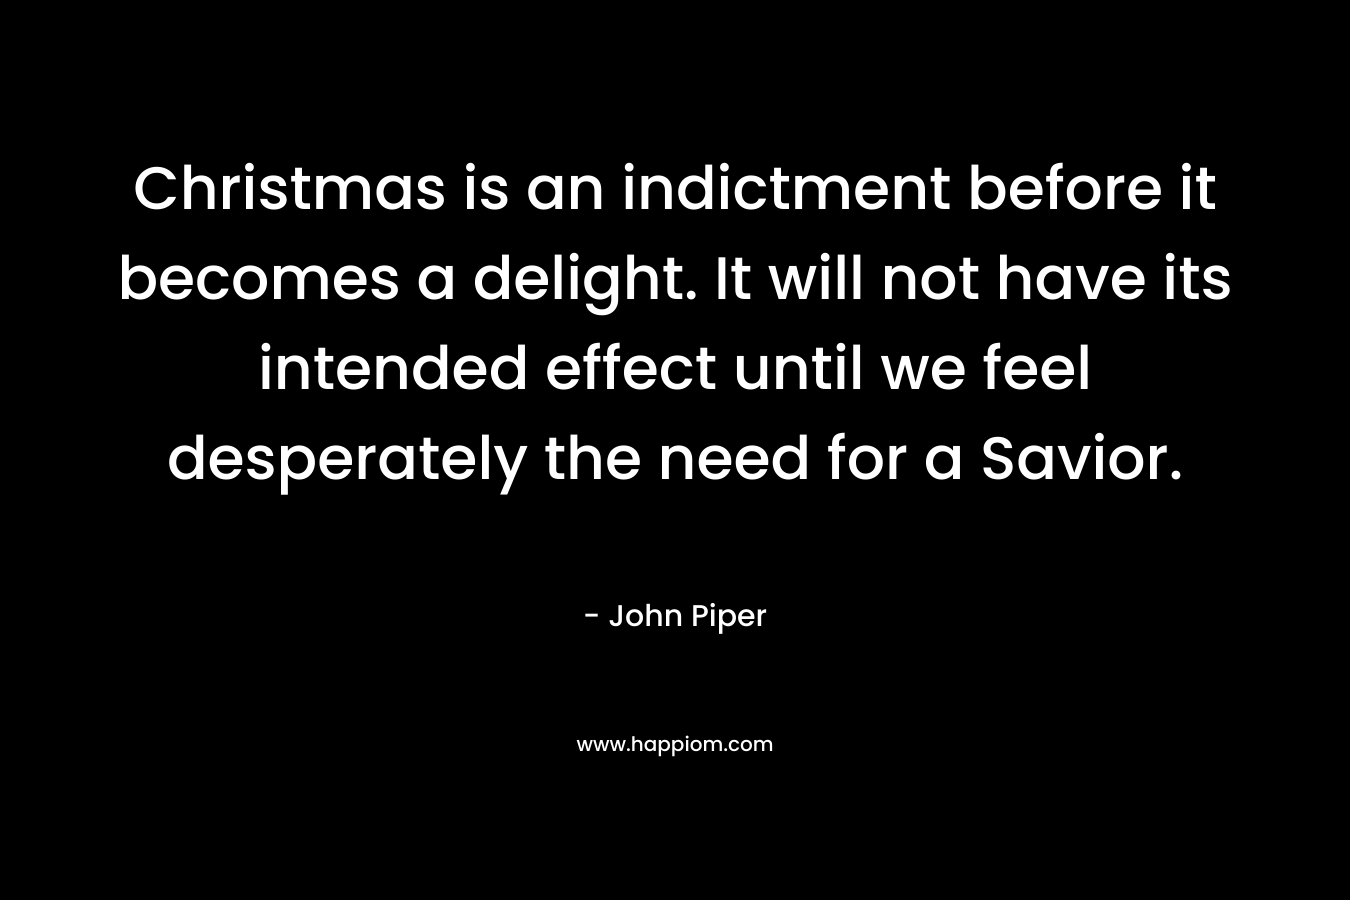 Christmas is an indictment before it becomes a delight. It will not have its intended effect until we feel desperately the need for a Savior. – John Piper